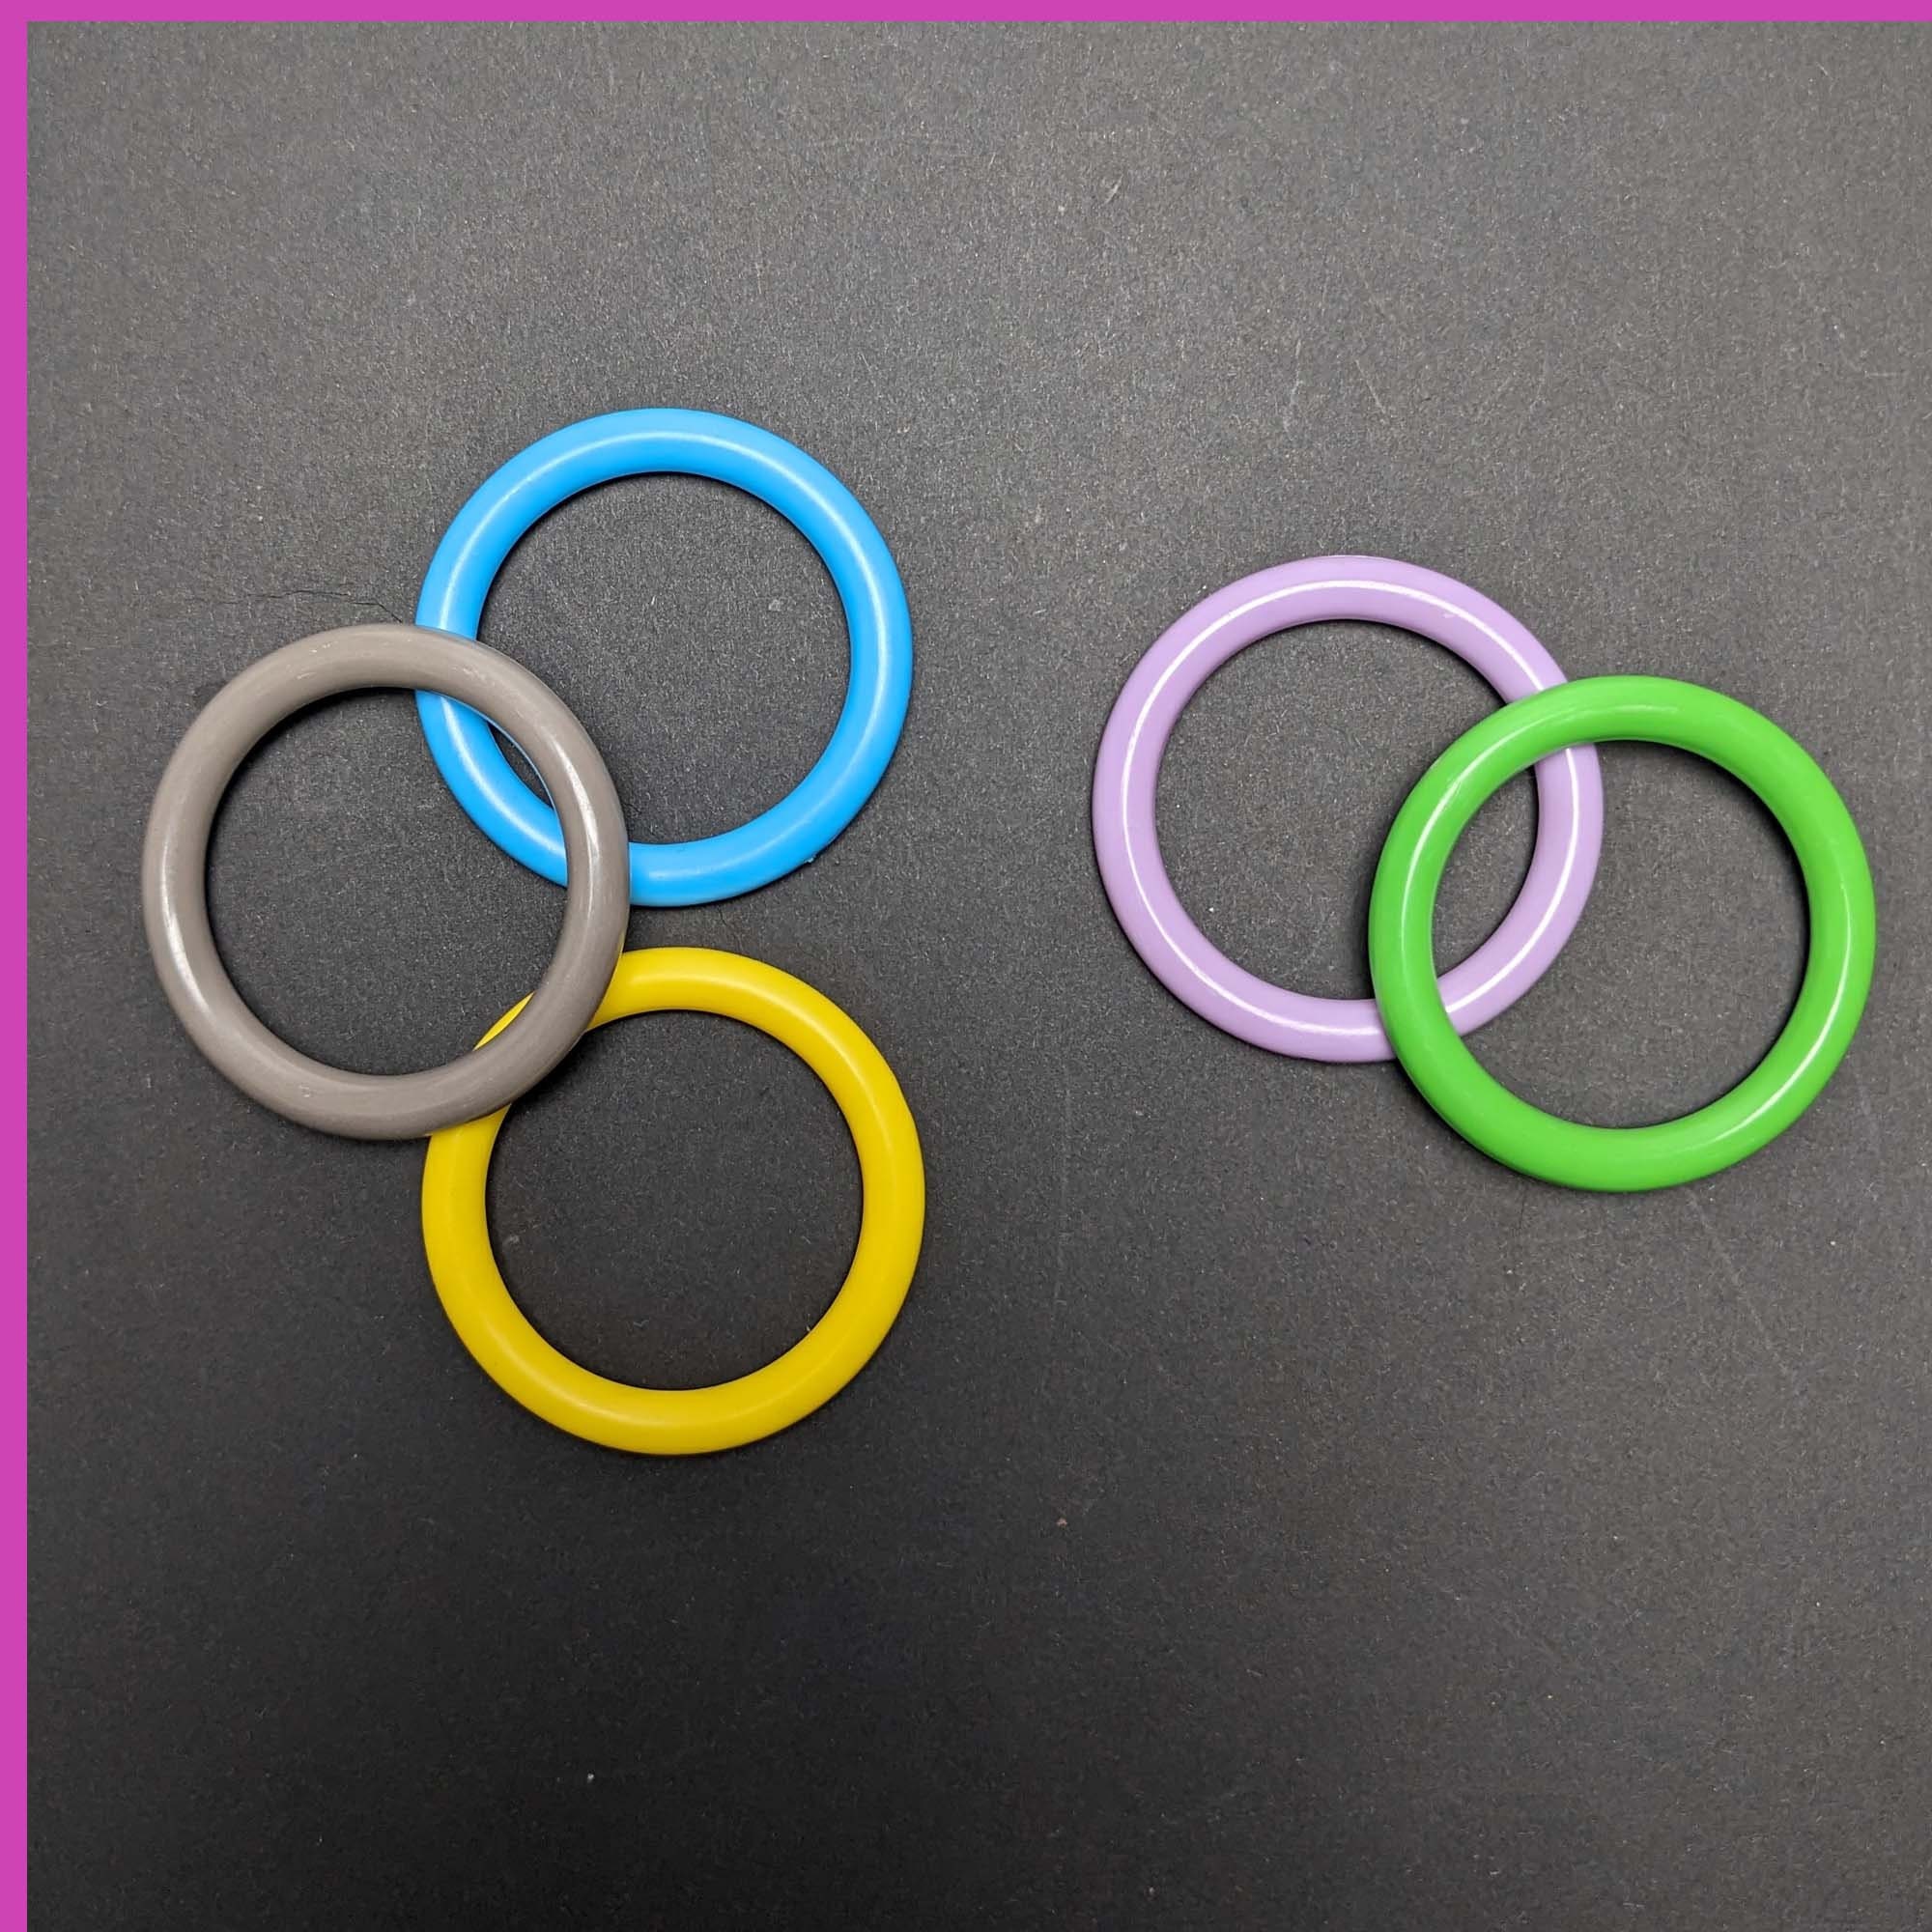  Metal Rings for Macrame 2 inch for Macrame Plant